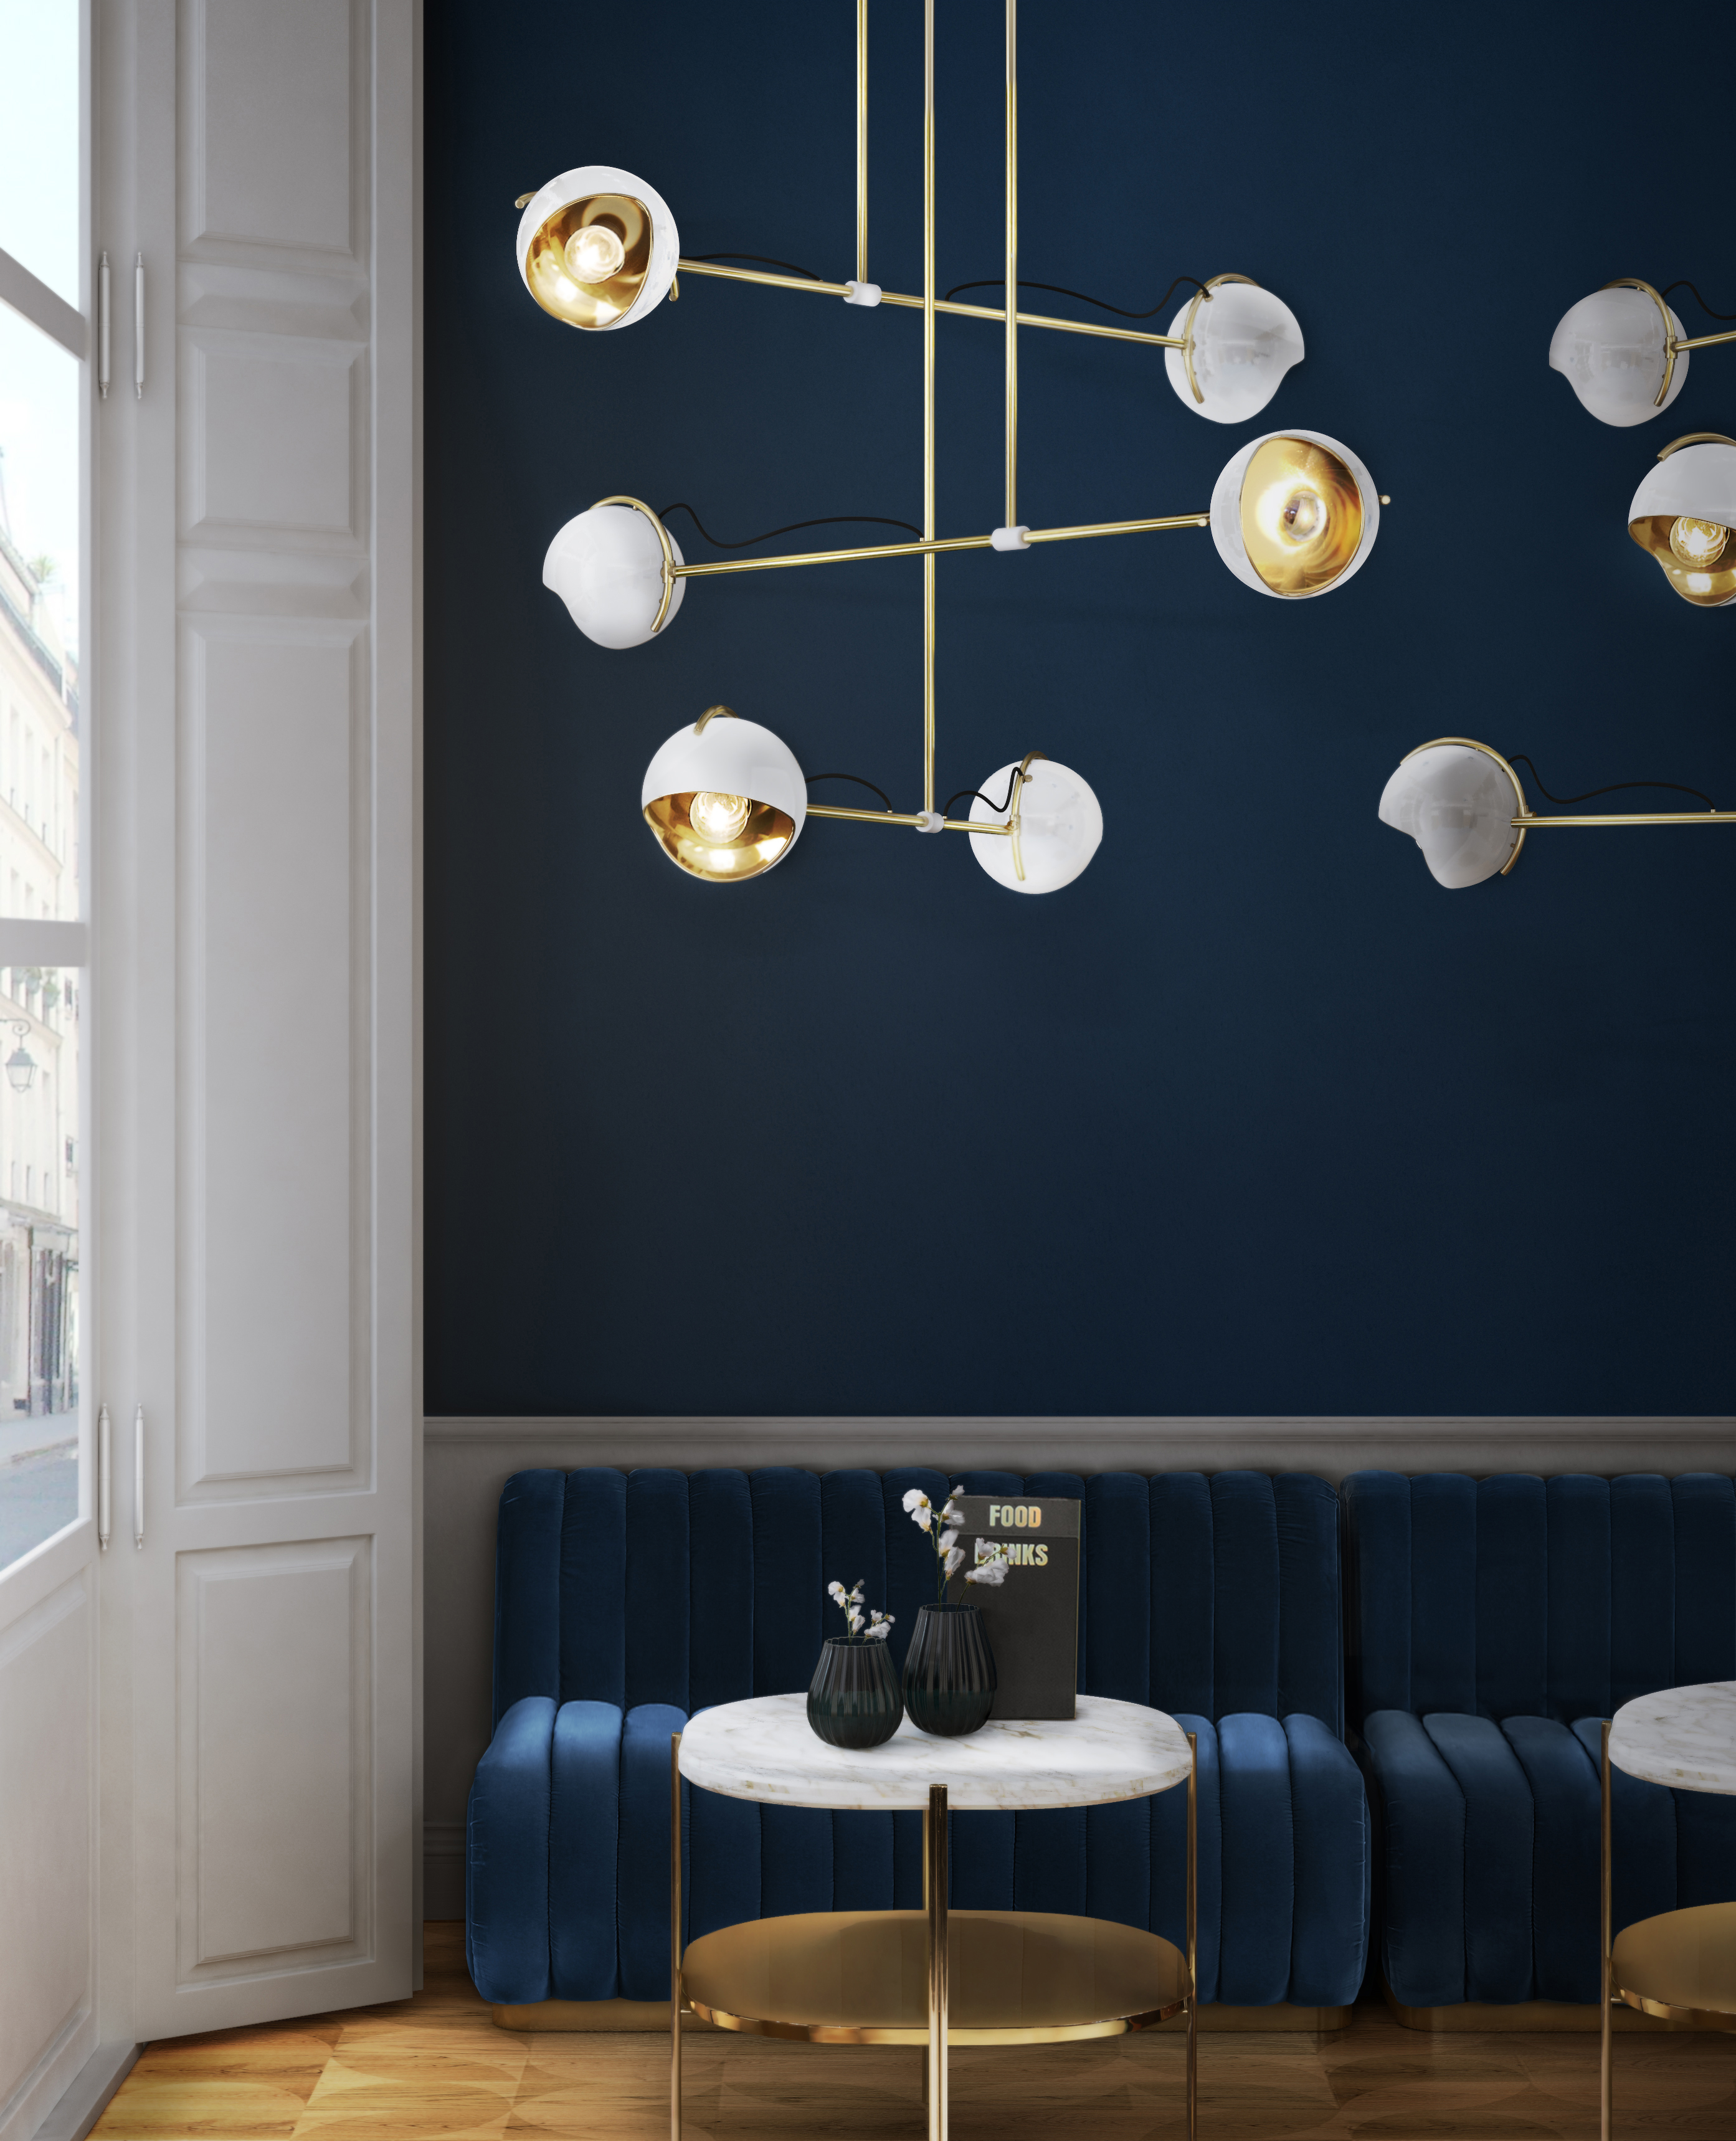 2018 Color Trends That You Need to Get to Know Before The Year Ends_3